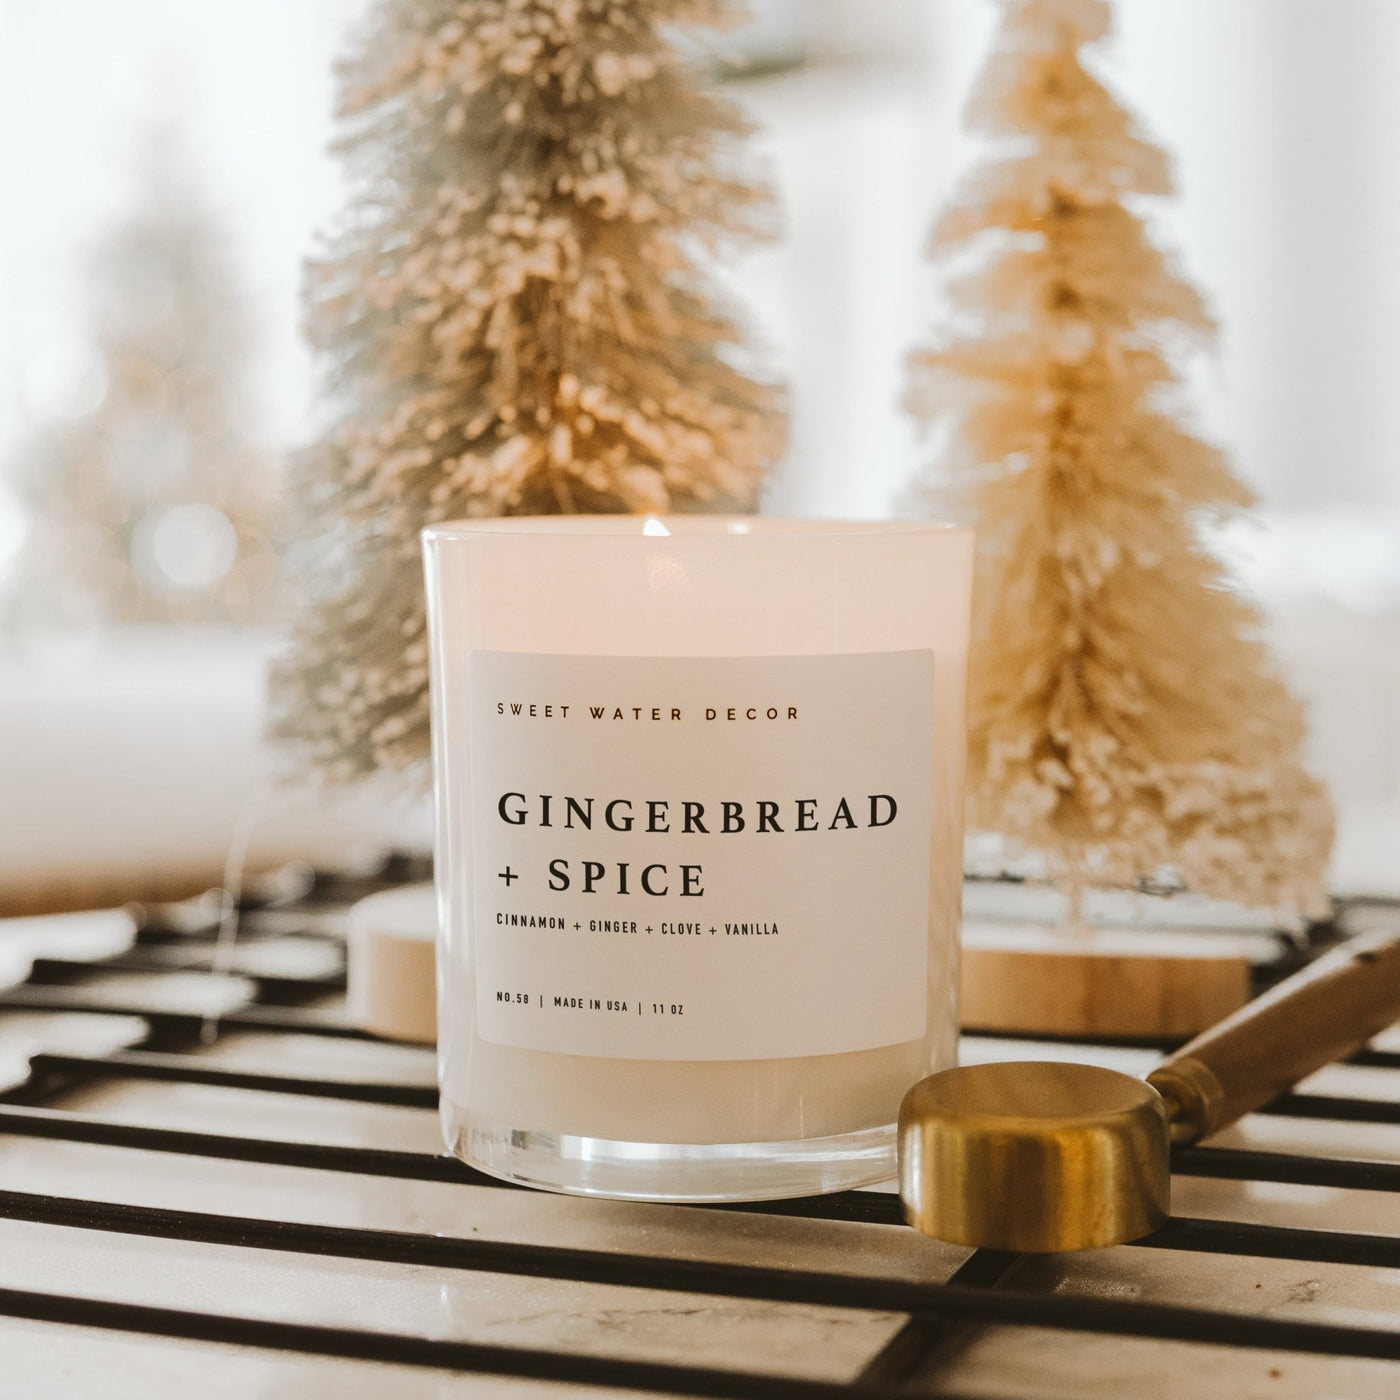 Gingerbread and Spice Soy Candle - White Jar - 11 oz - Sweet Water Decor - Candles